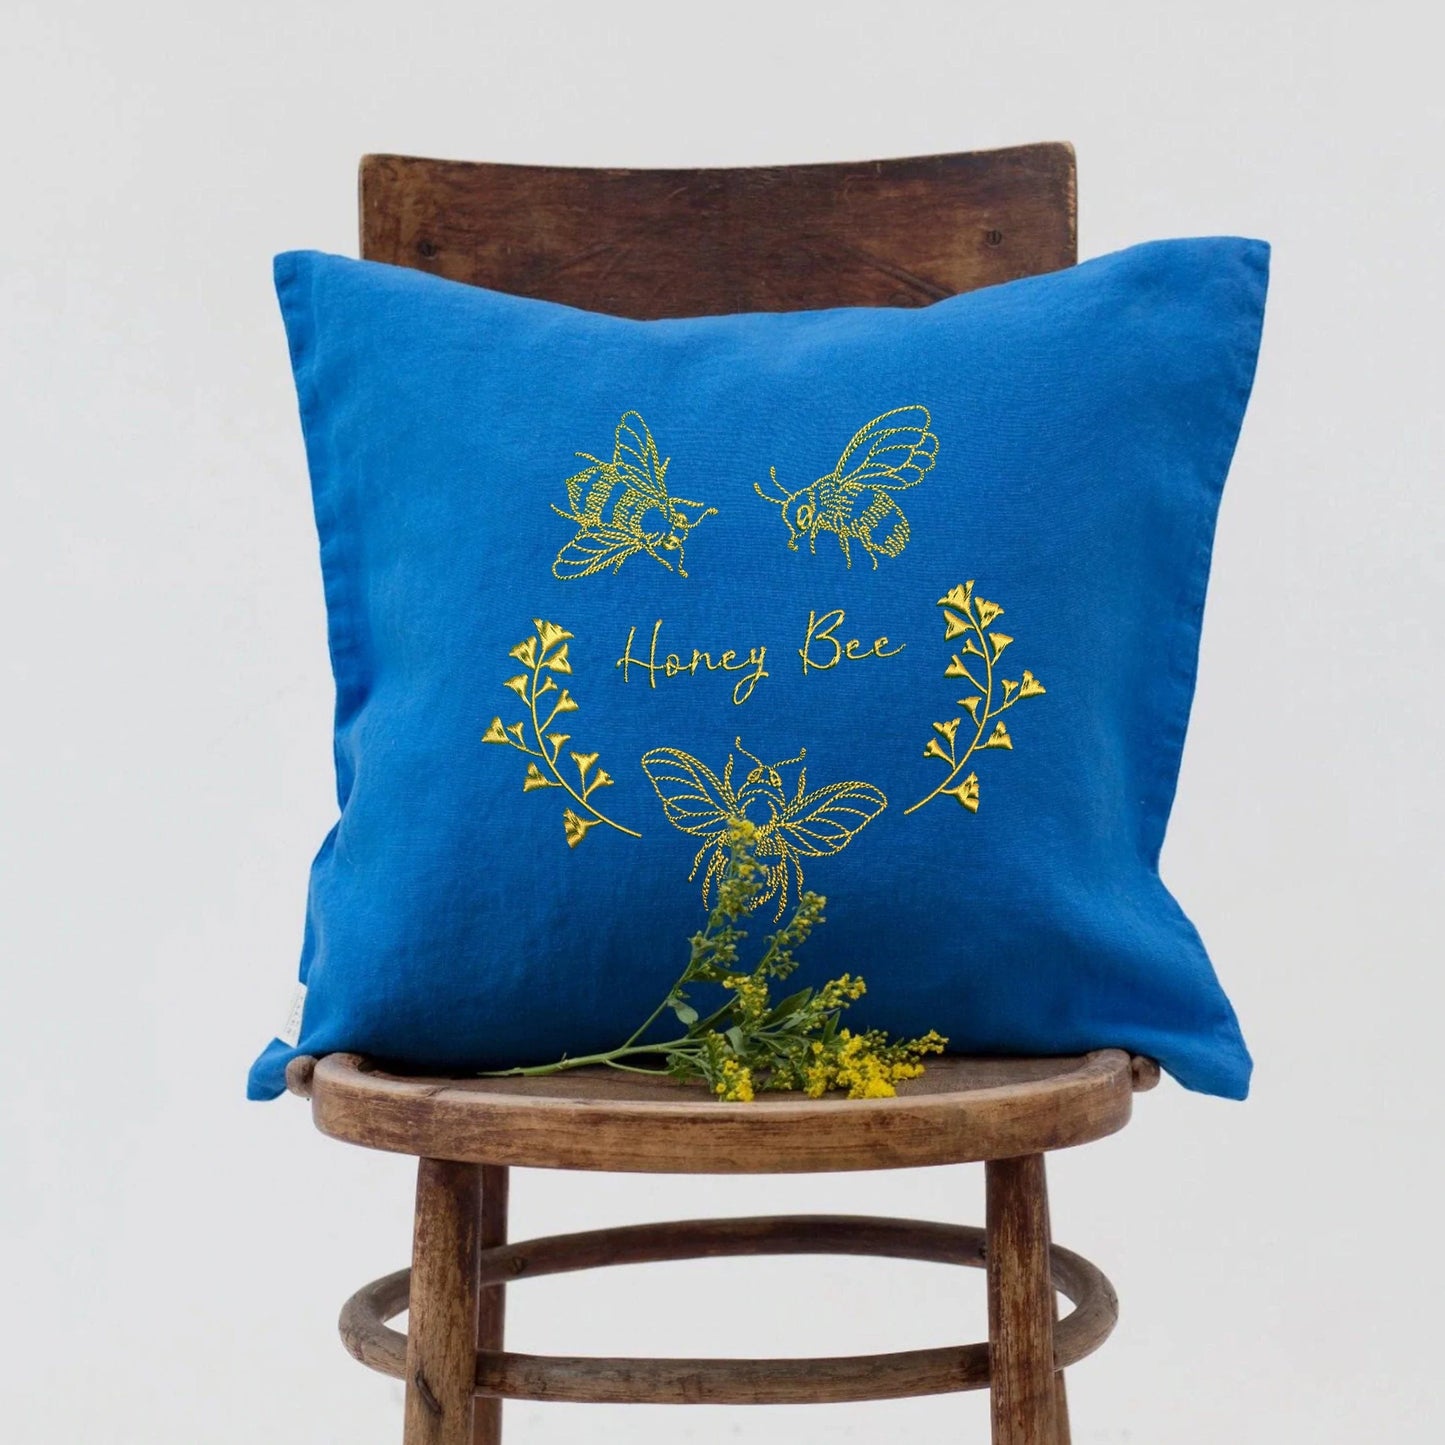 Honey Bee Machine Embroidery Design on a blue pillow